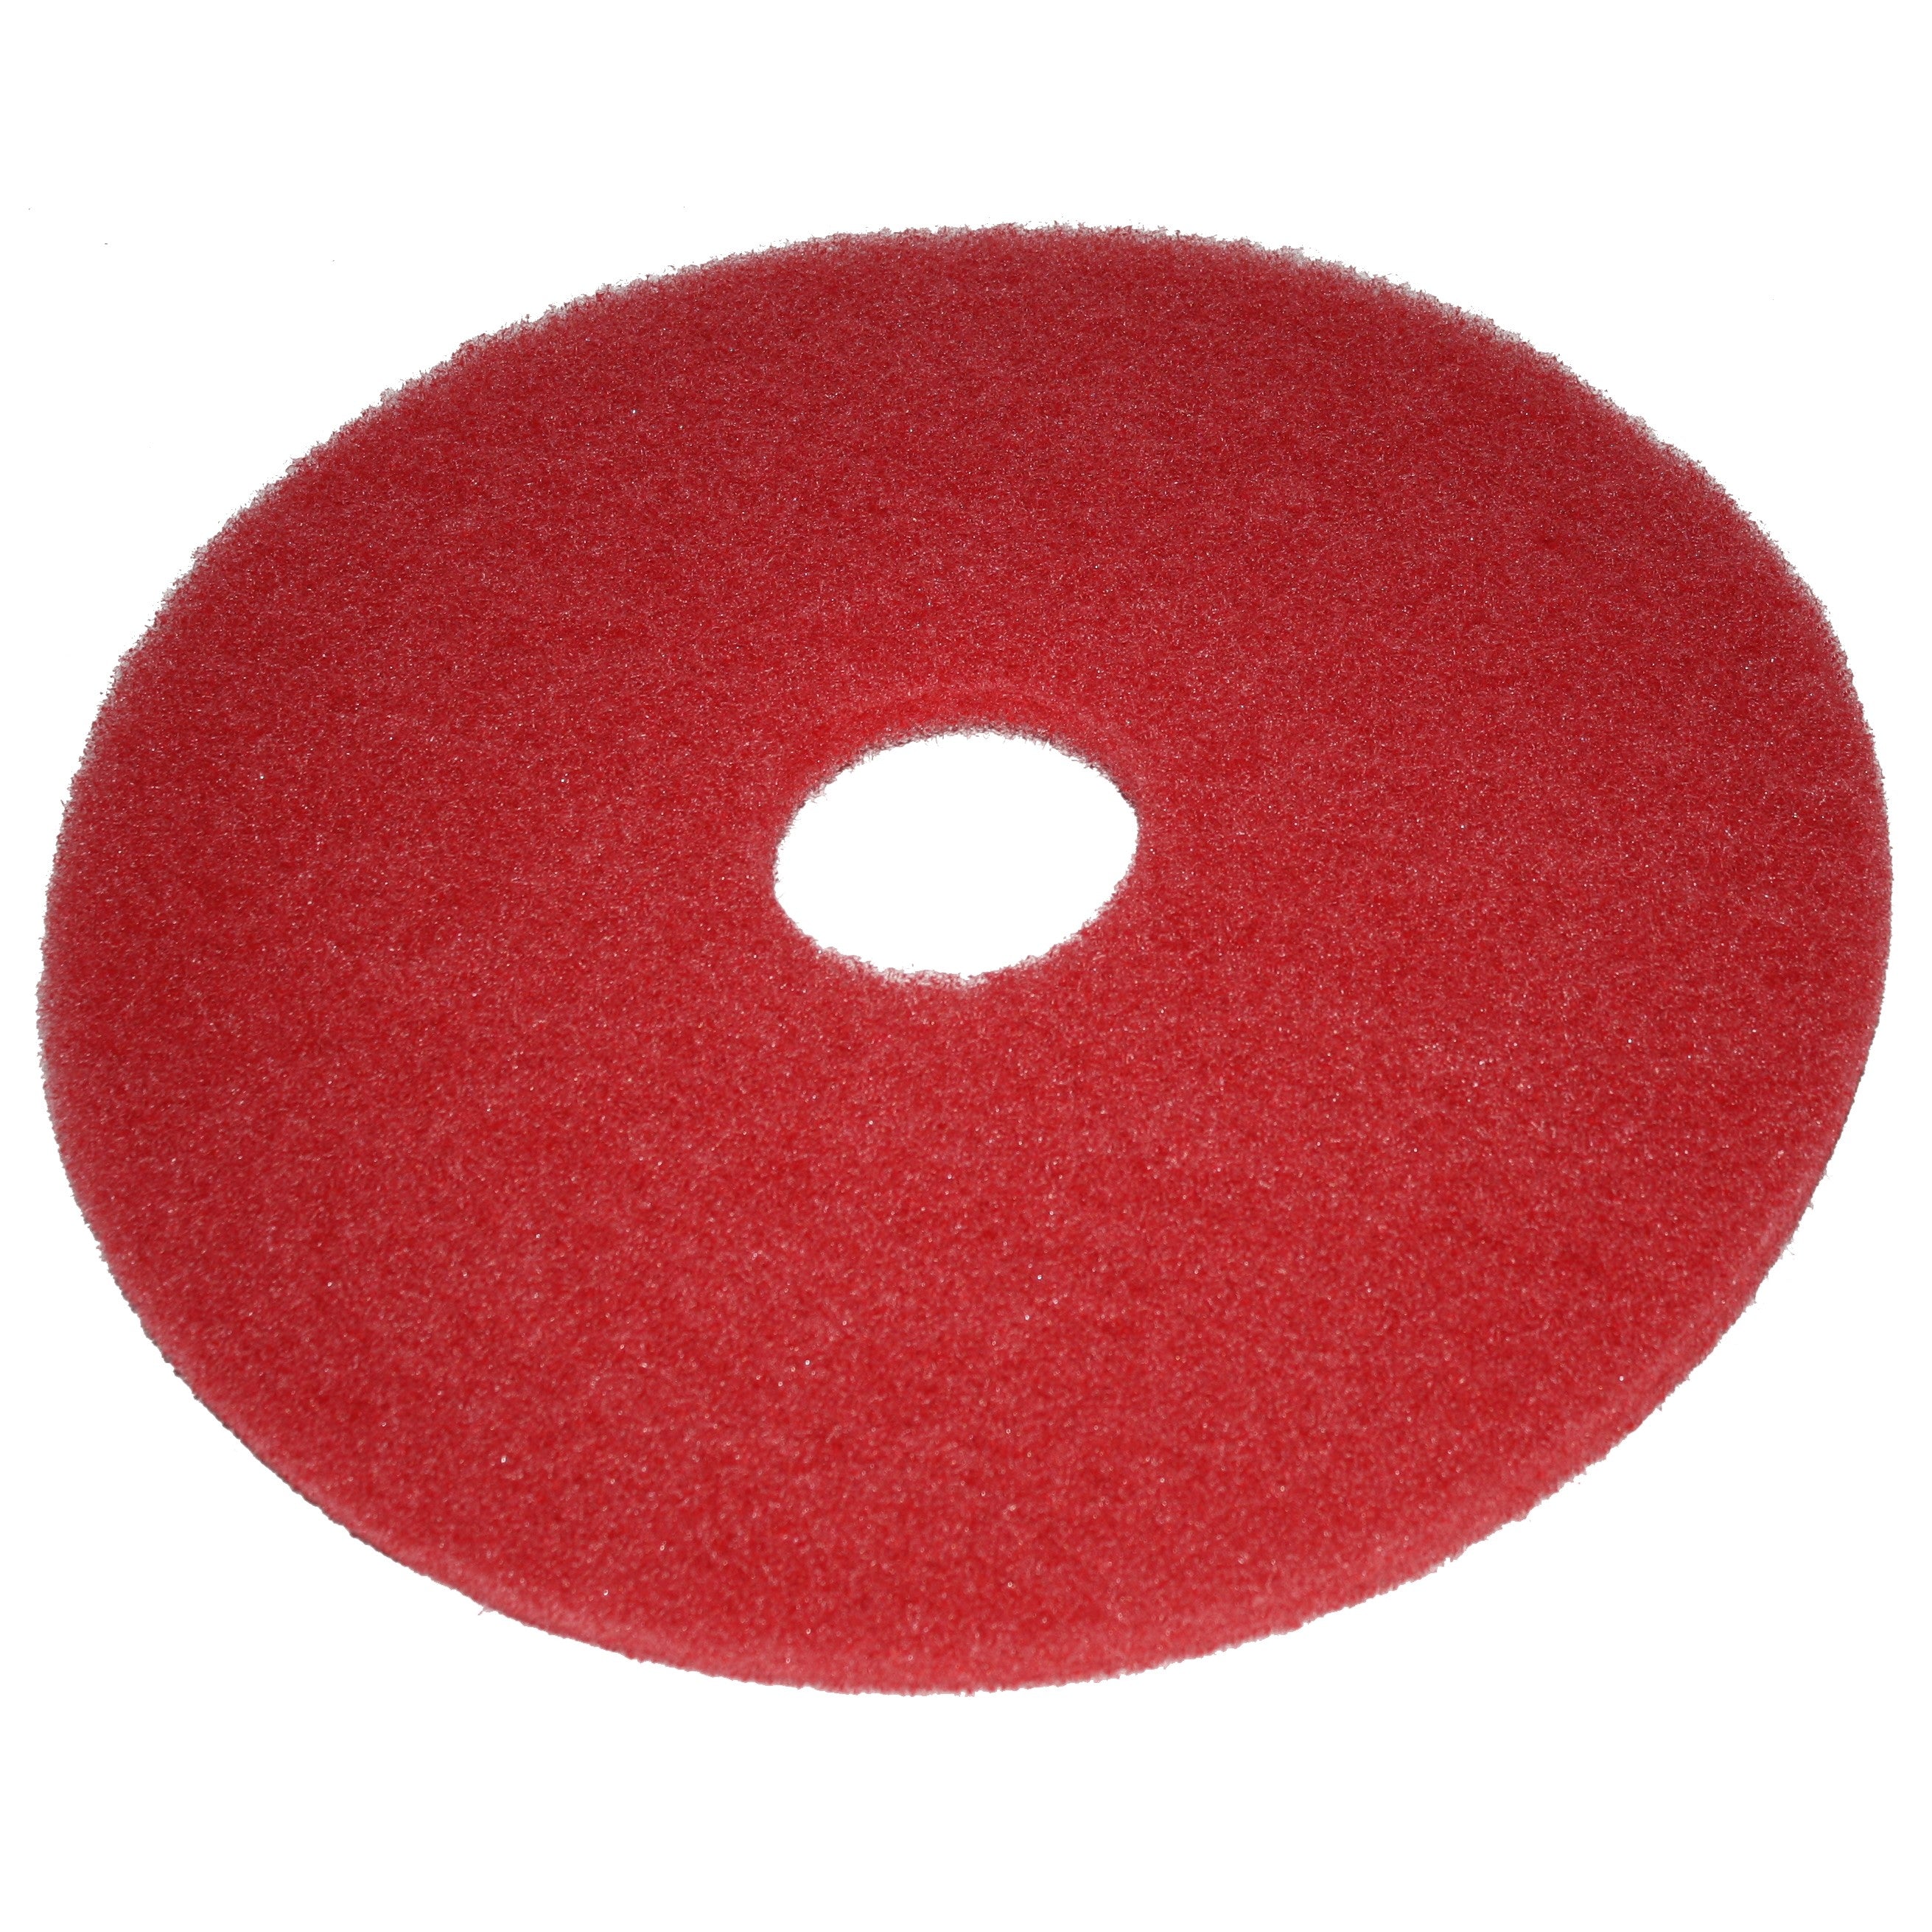 Pad rouge, Ø 305 mm, polyester